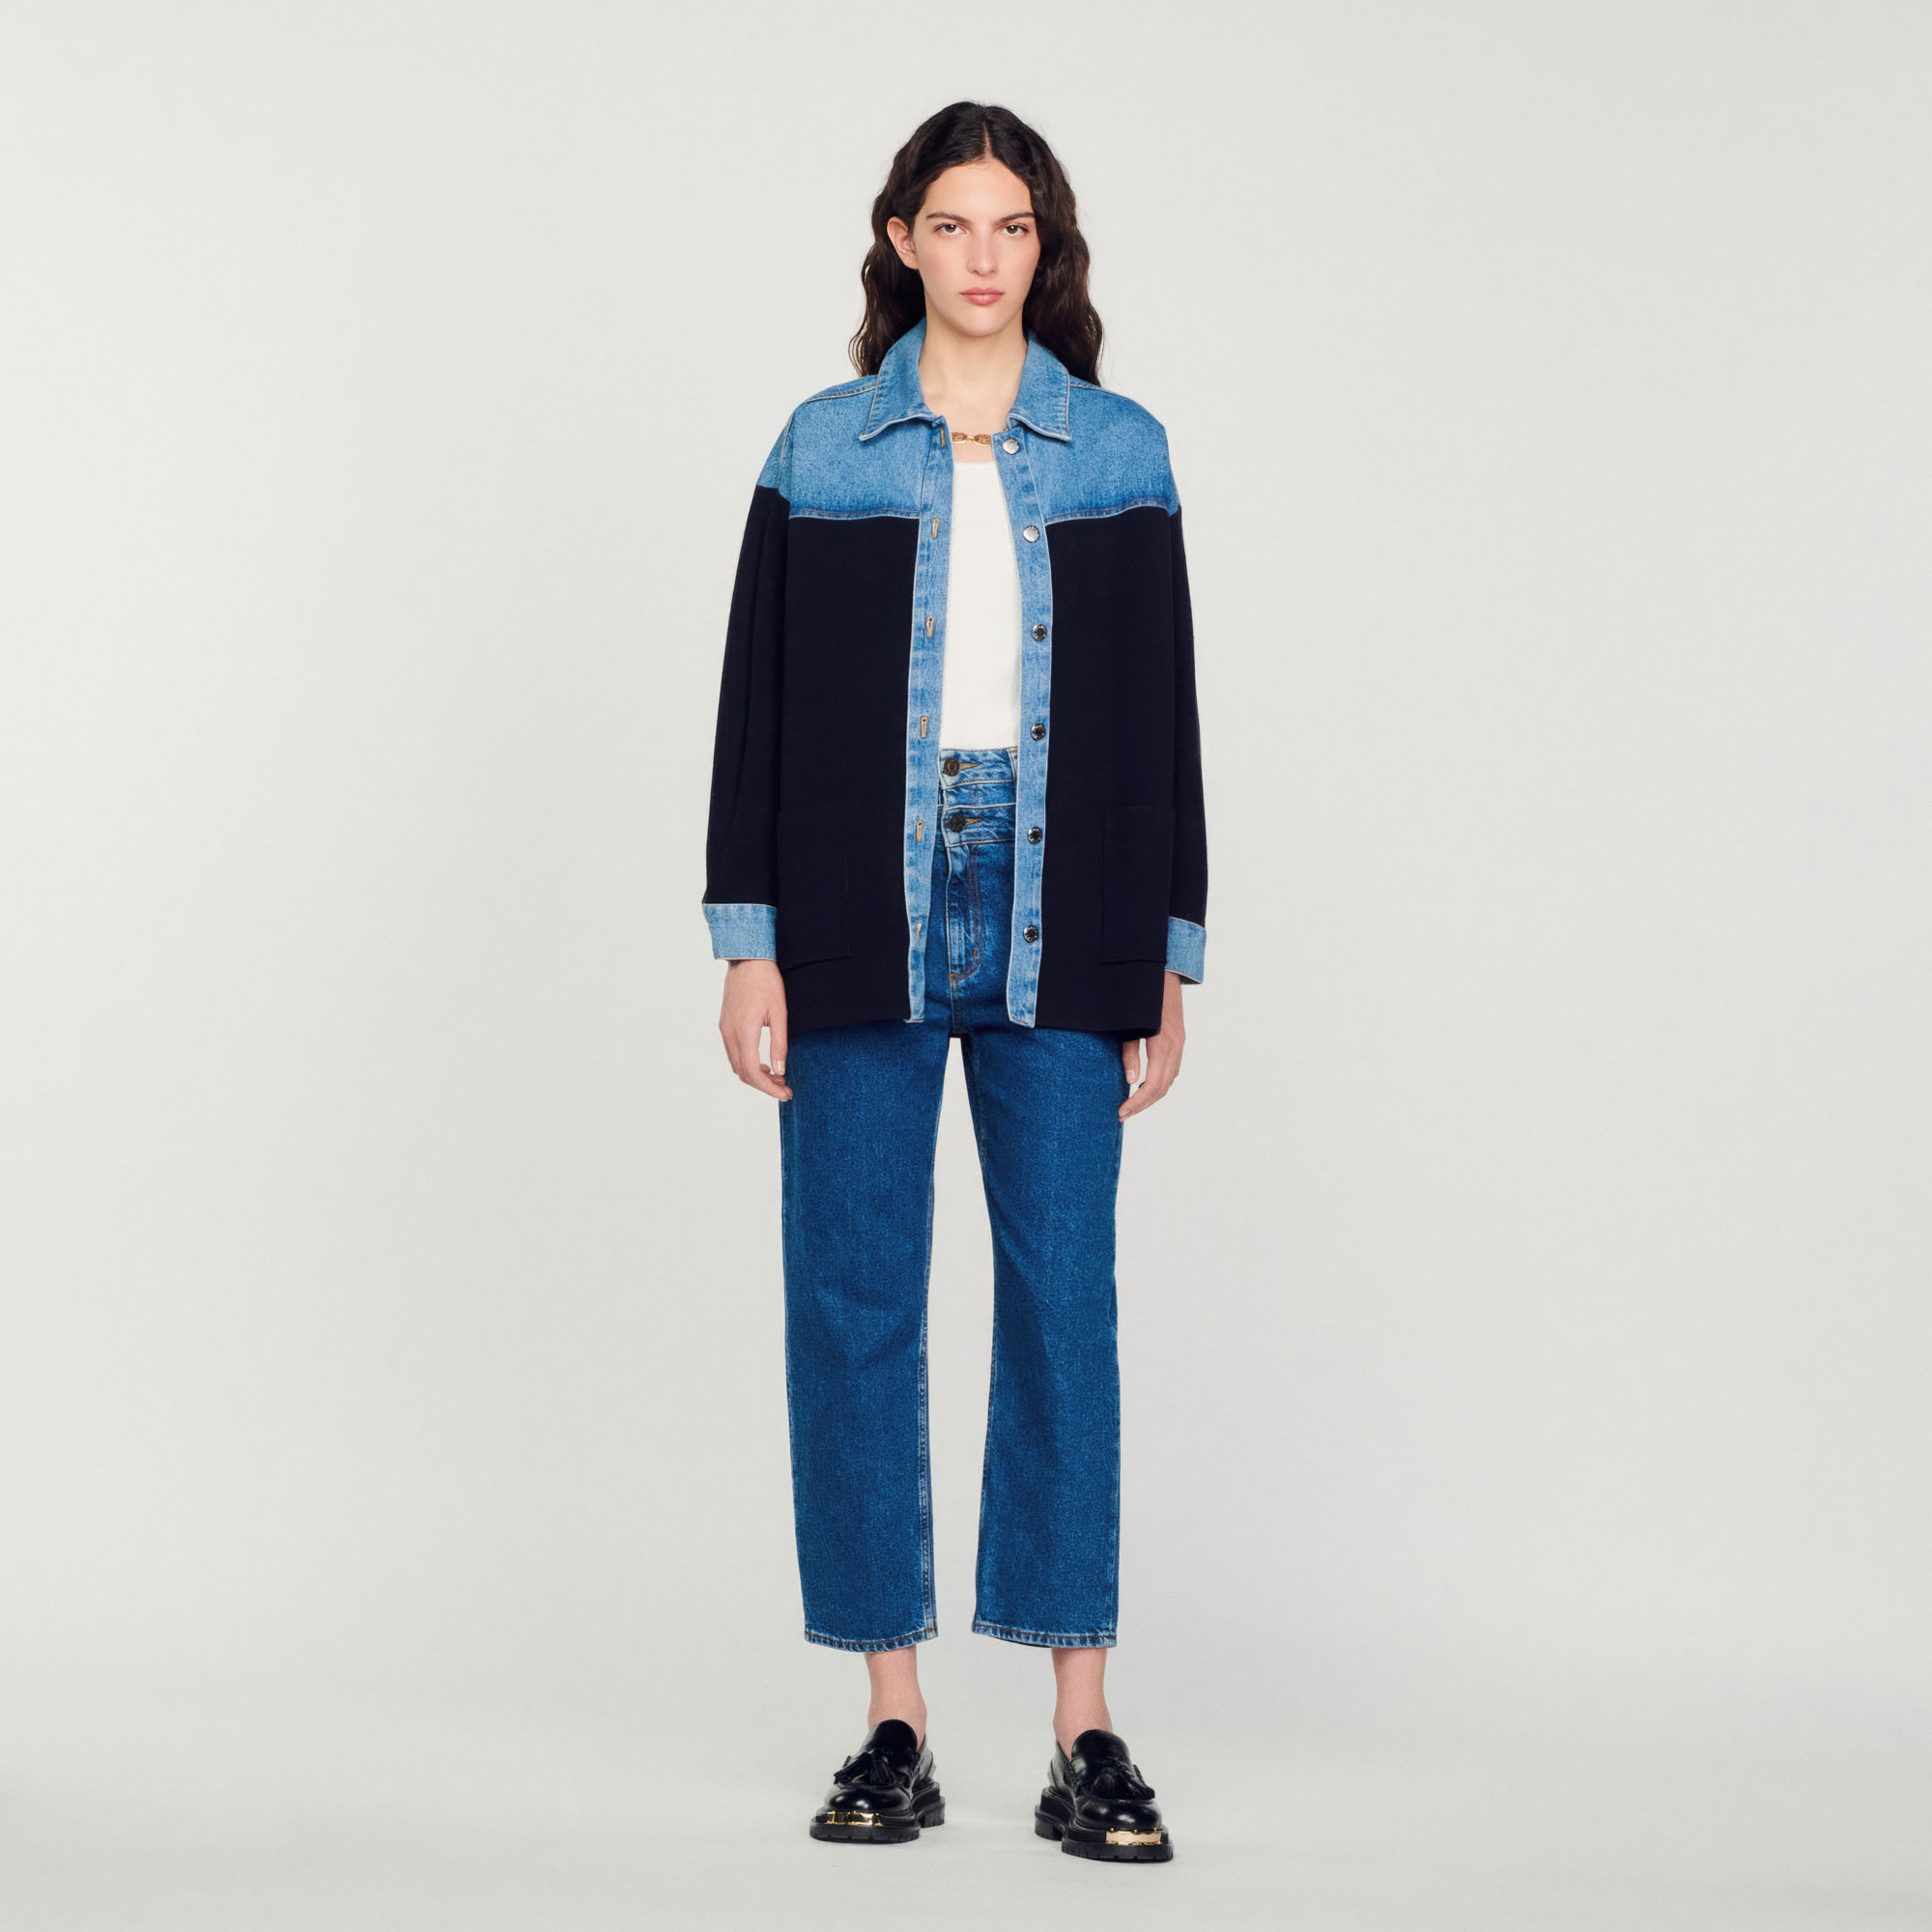 Sandro viscose â€¢ Sandro Women's reversible jacket The model is 178 cm / 5'10 tall and wears a size 1 FR / 8 UK The viscose in this item has a lower environmental impact than traditional viscose